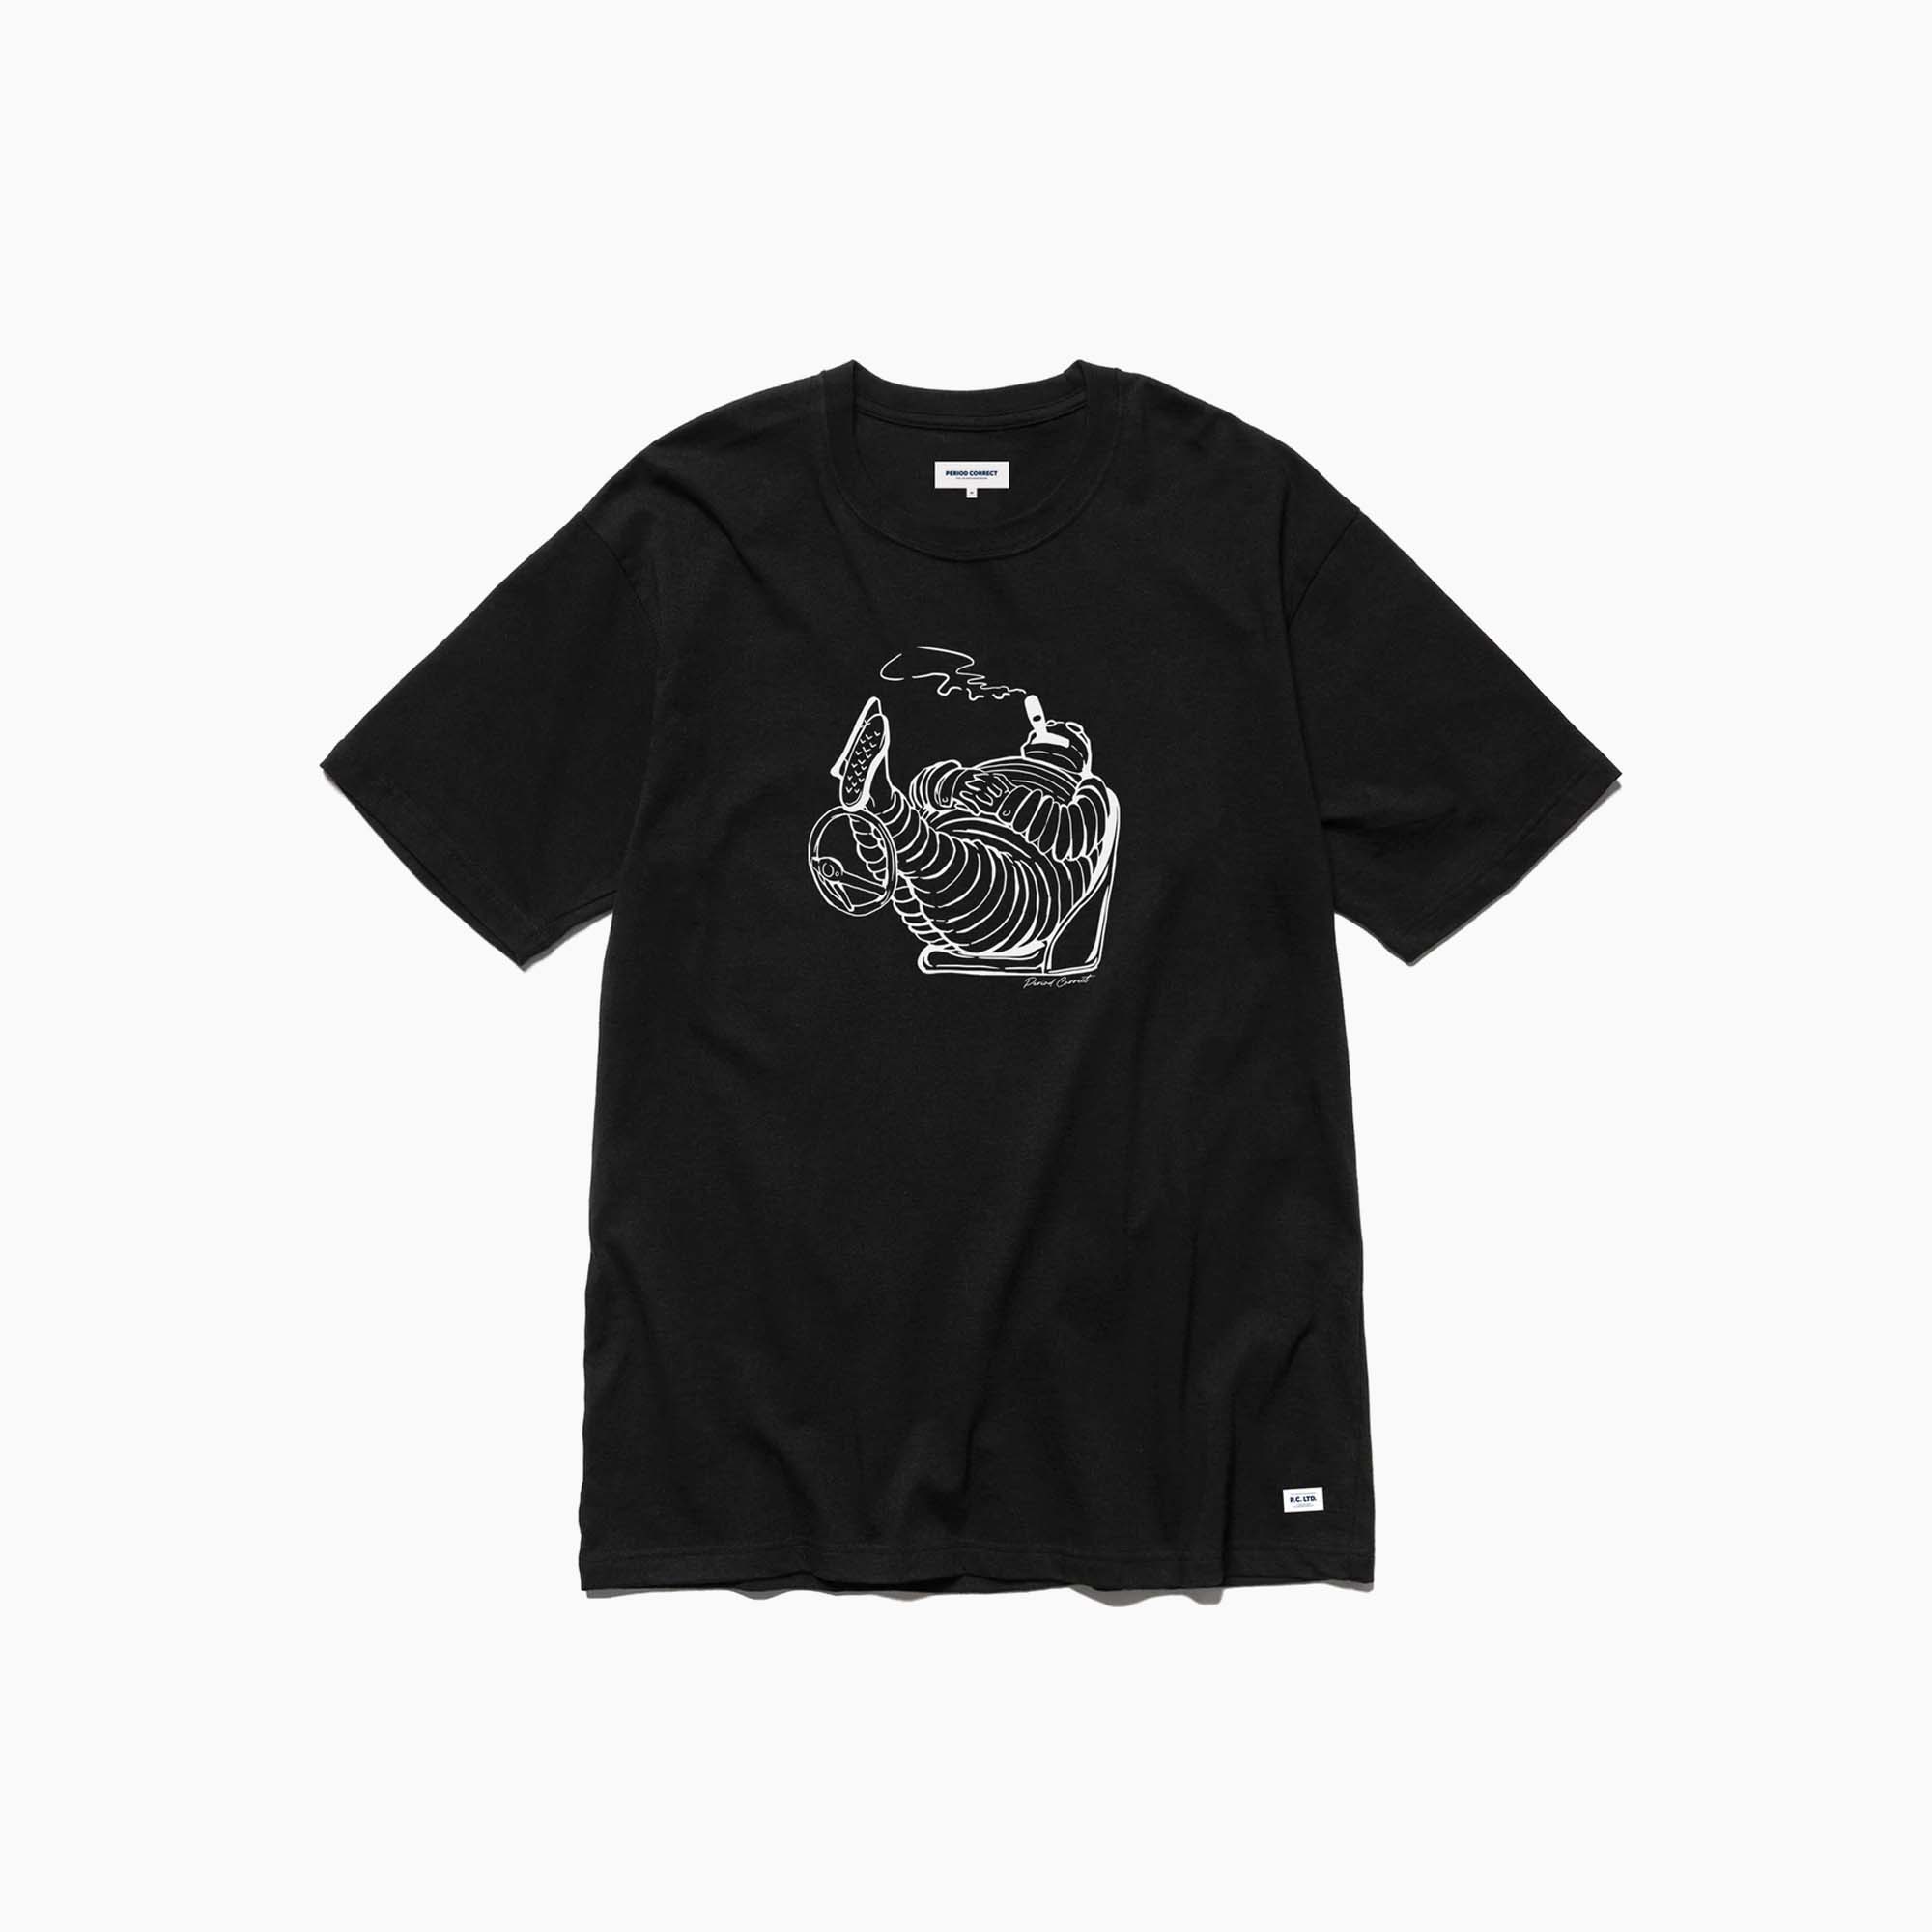 Period Correct | Tyred T-Shirt-T-Shirt-Period Correct-gpx-store